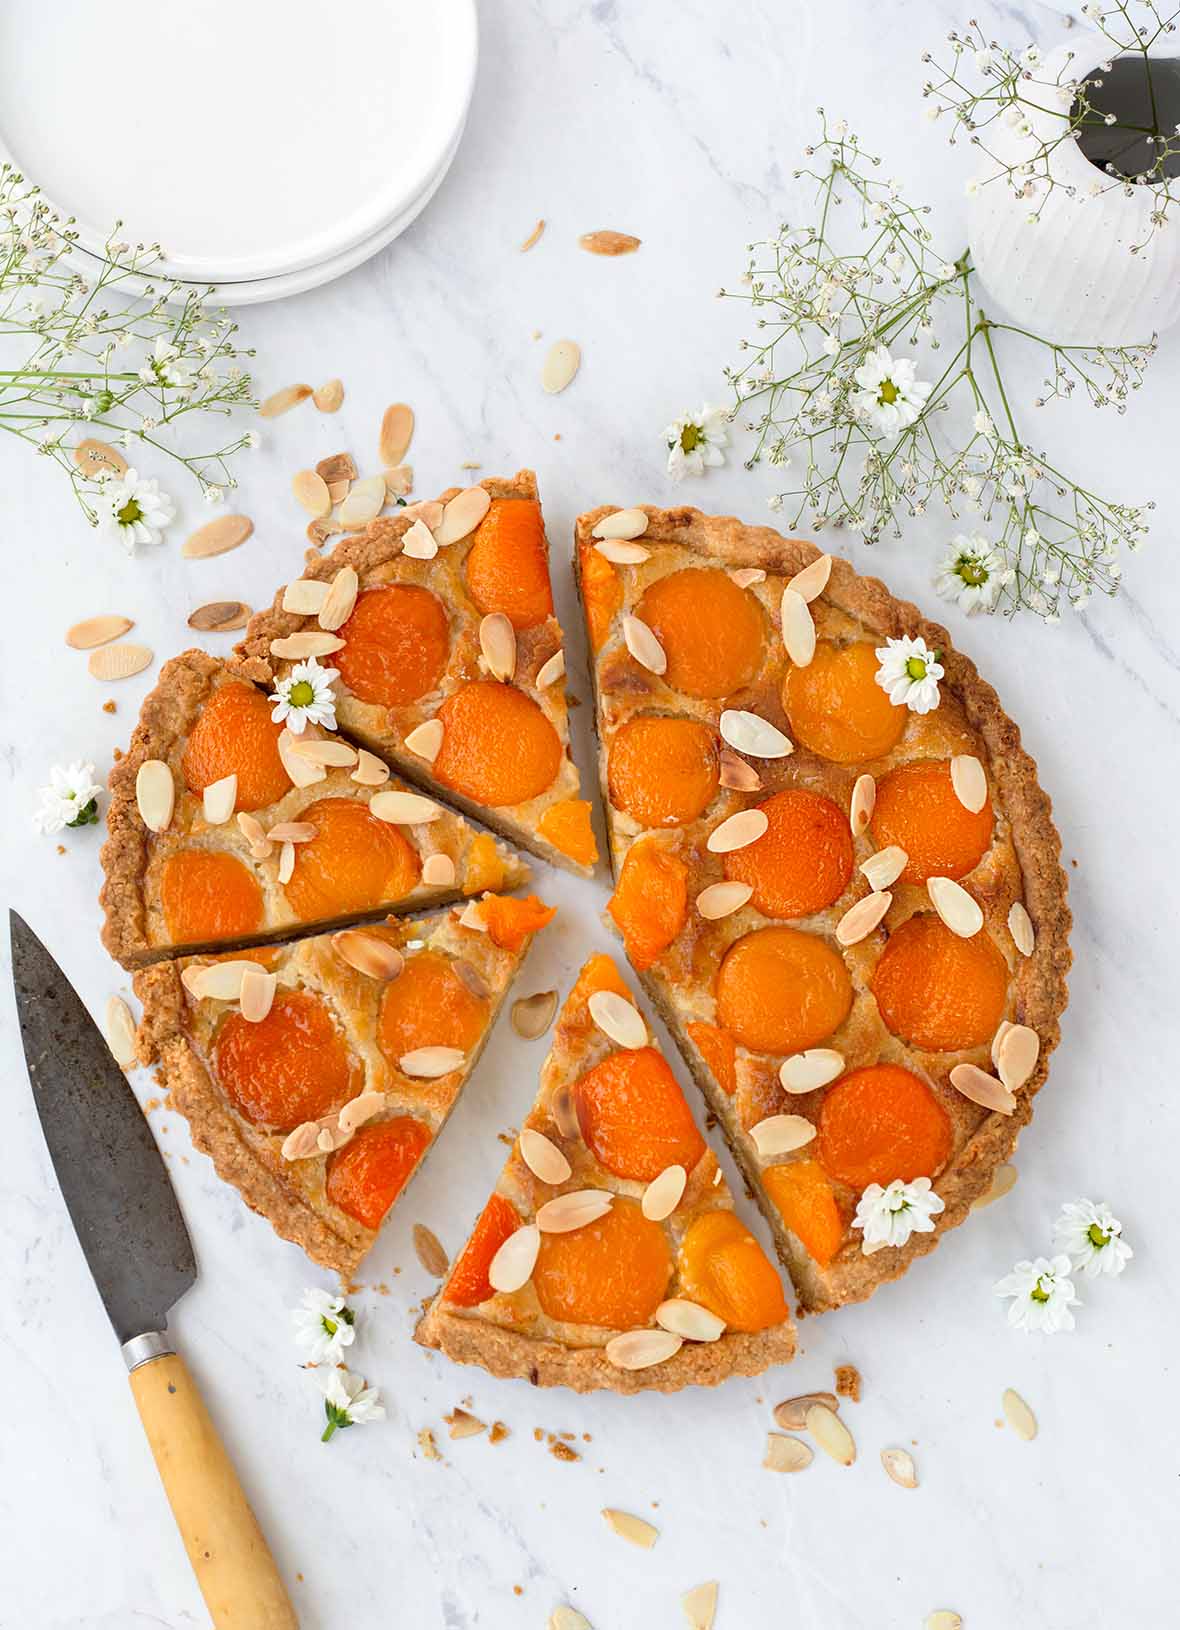 French Apricot Pastry Recipe - Entertaining with Beth